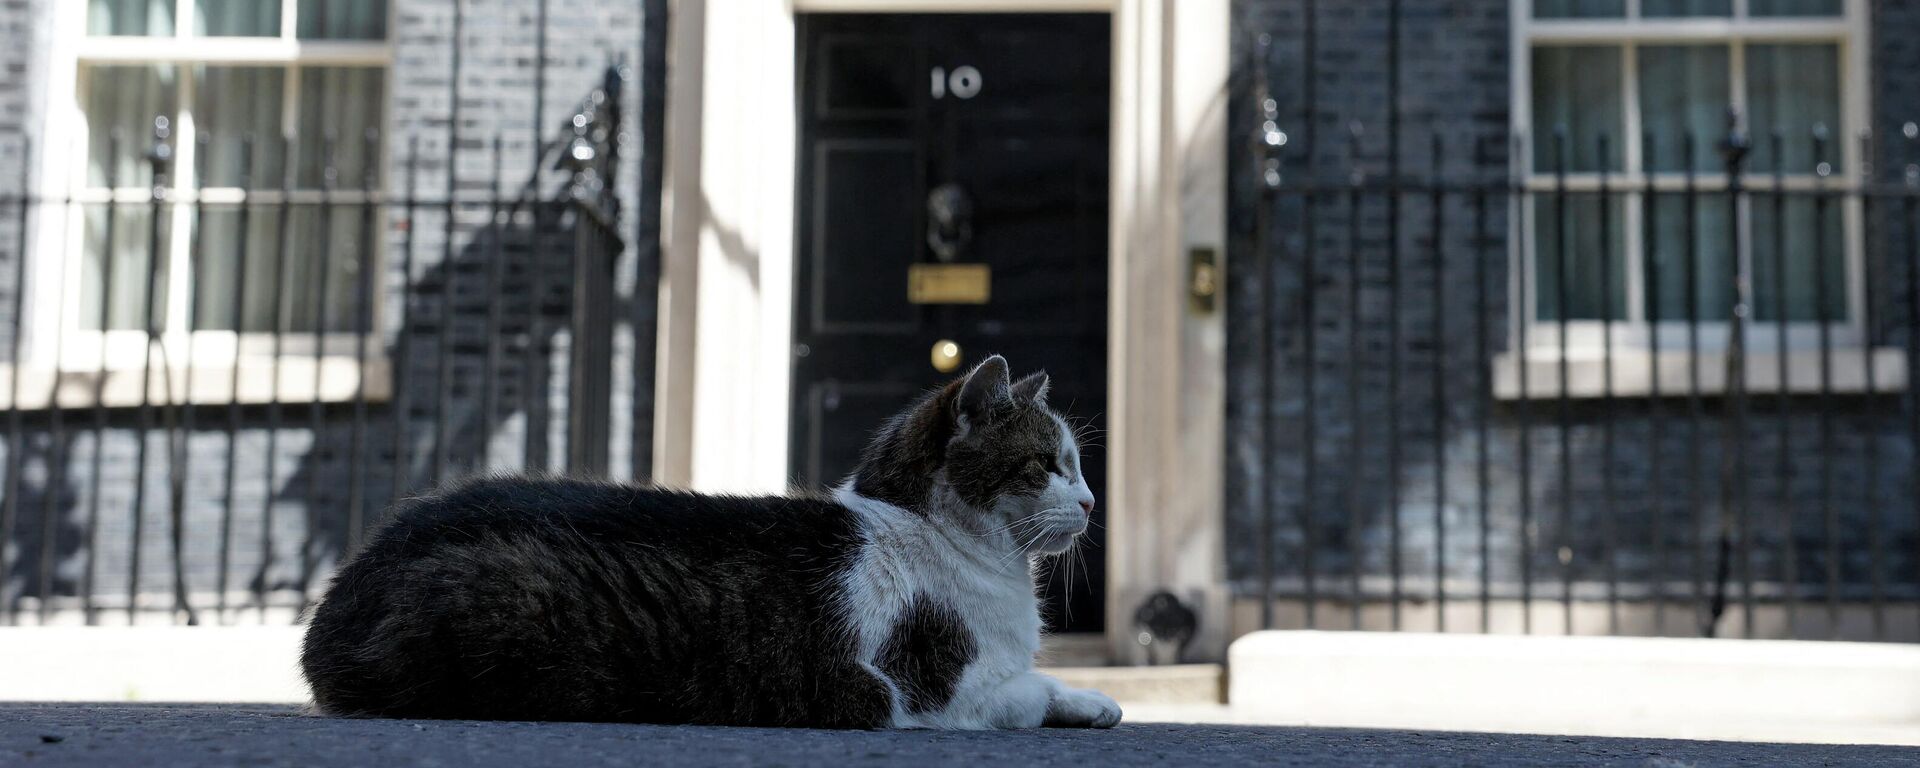 Larry the Downing Street cat lays in the road outside of 10 Downing Street, the official residence of Britain's Prime Minister, in central London on July 8, 2022 - Sputnik International, 1920, 13.07.2022